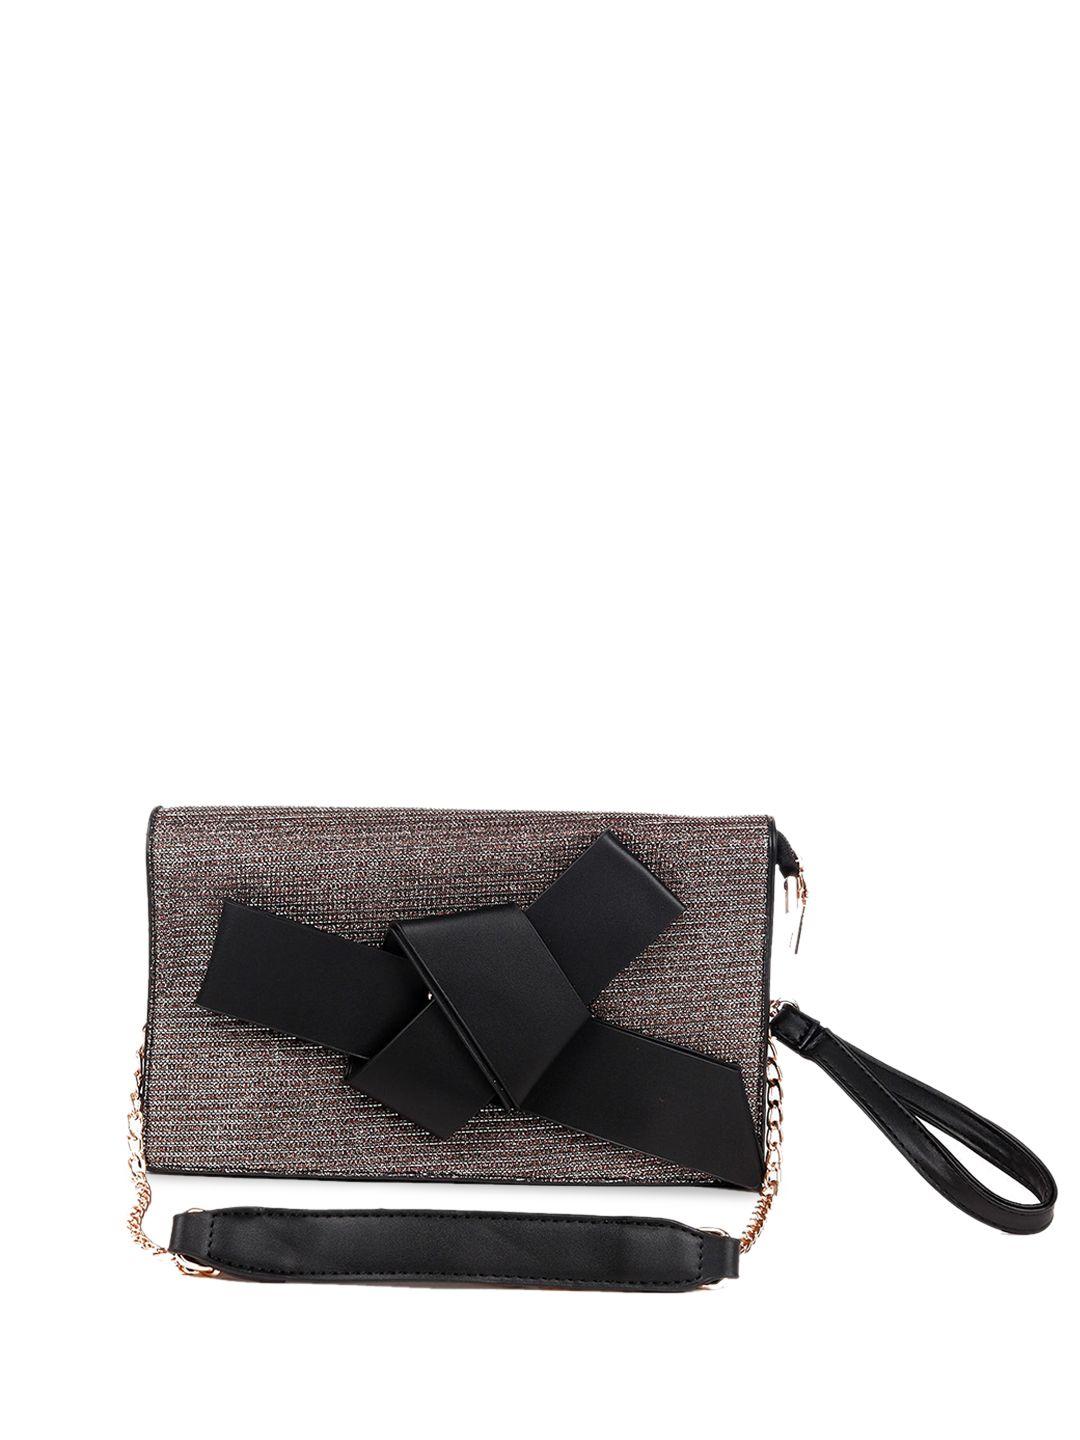 odette black colourblocked structured sling bag with bow detail